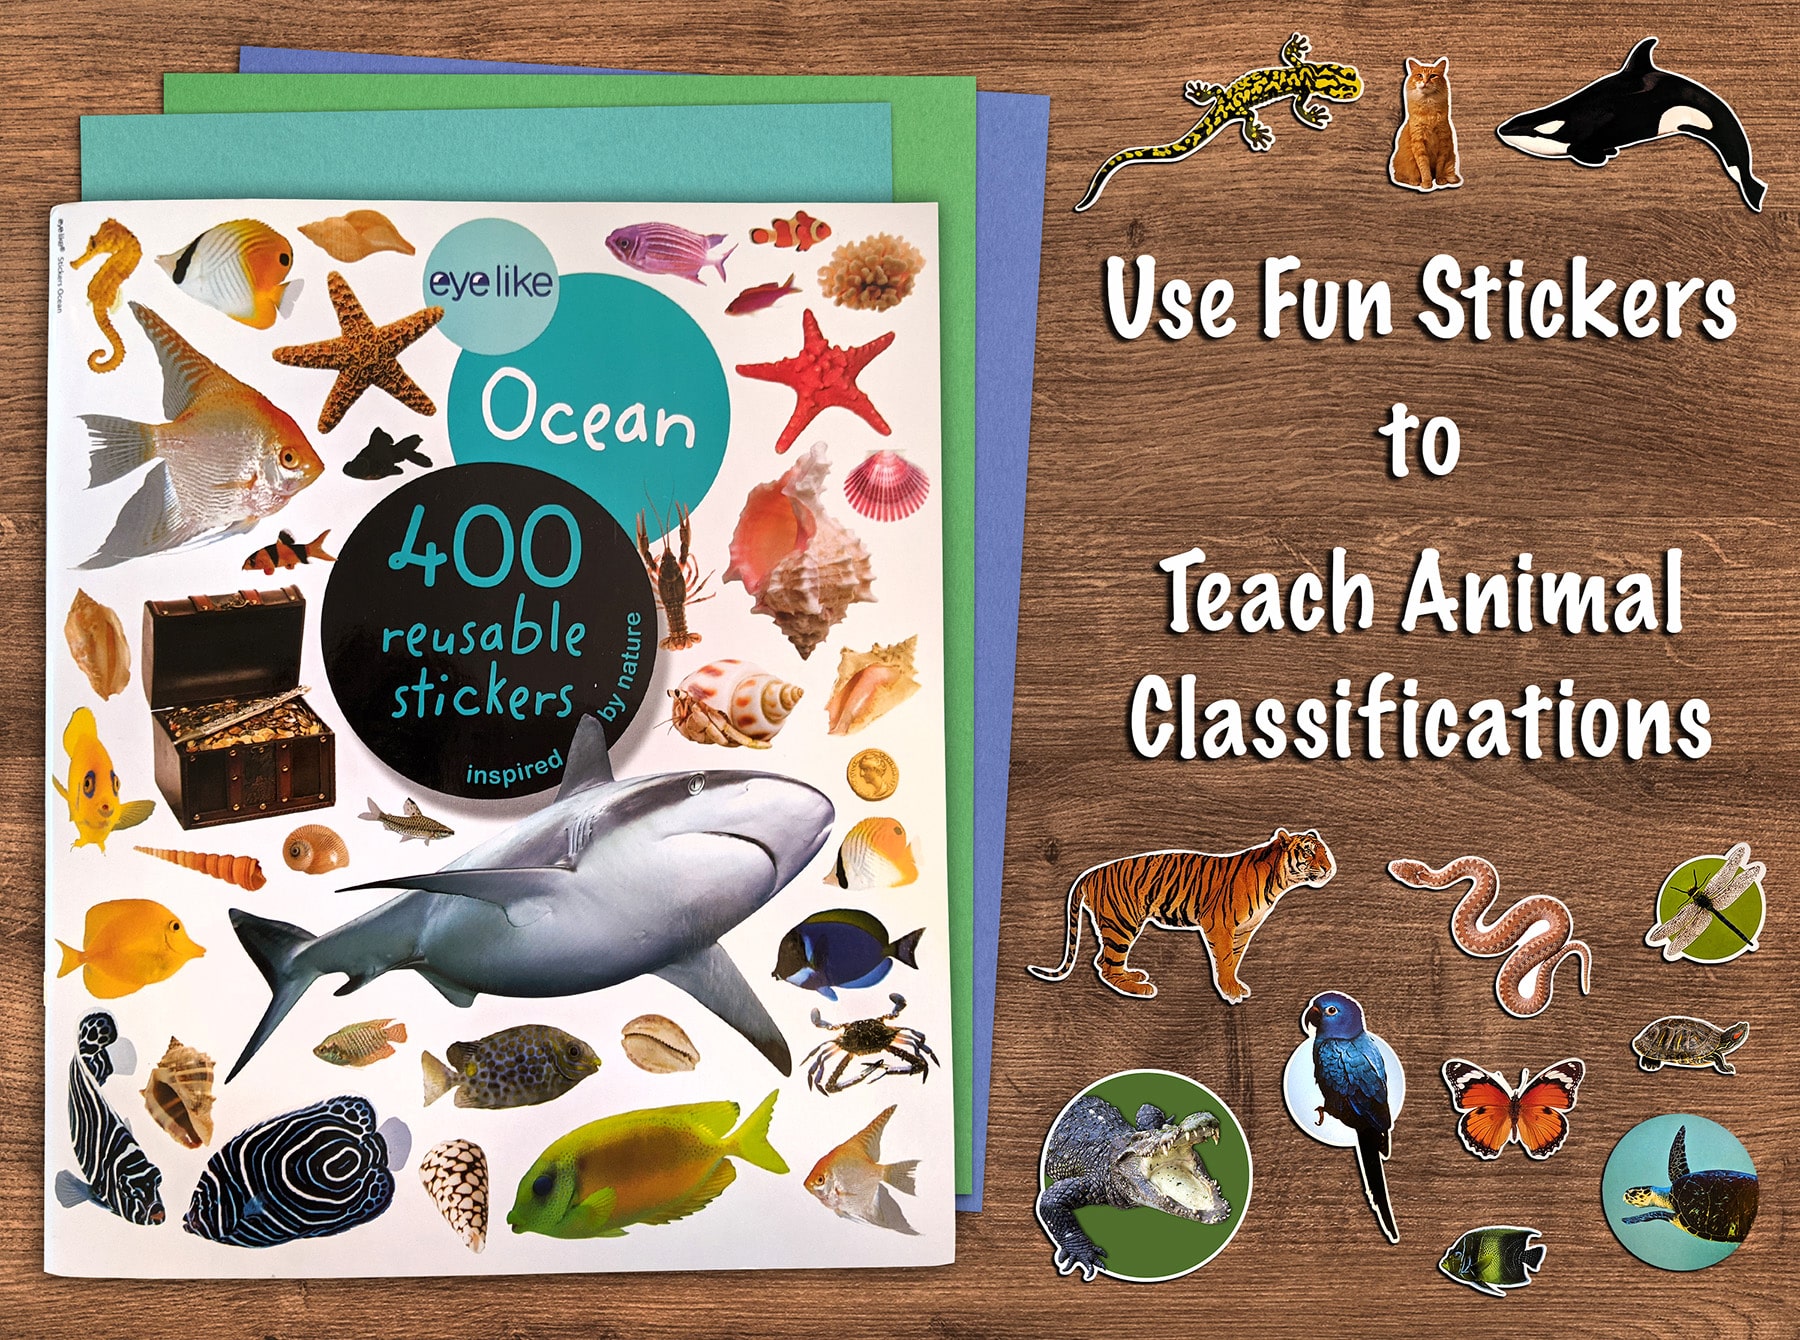 Use Stickers to Teach Animal Classifications